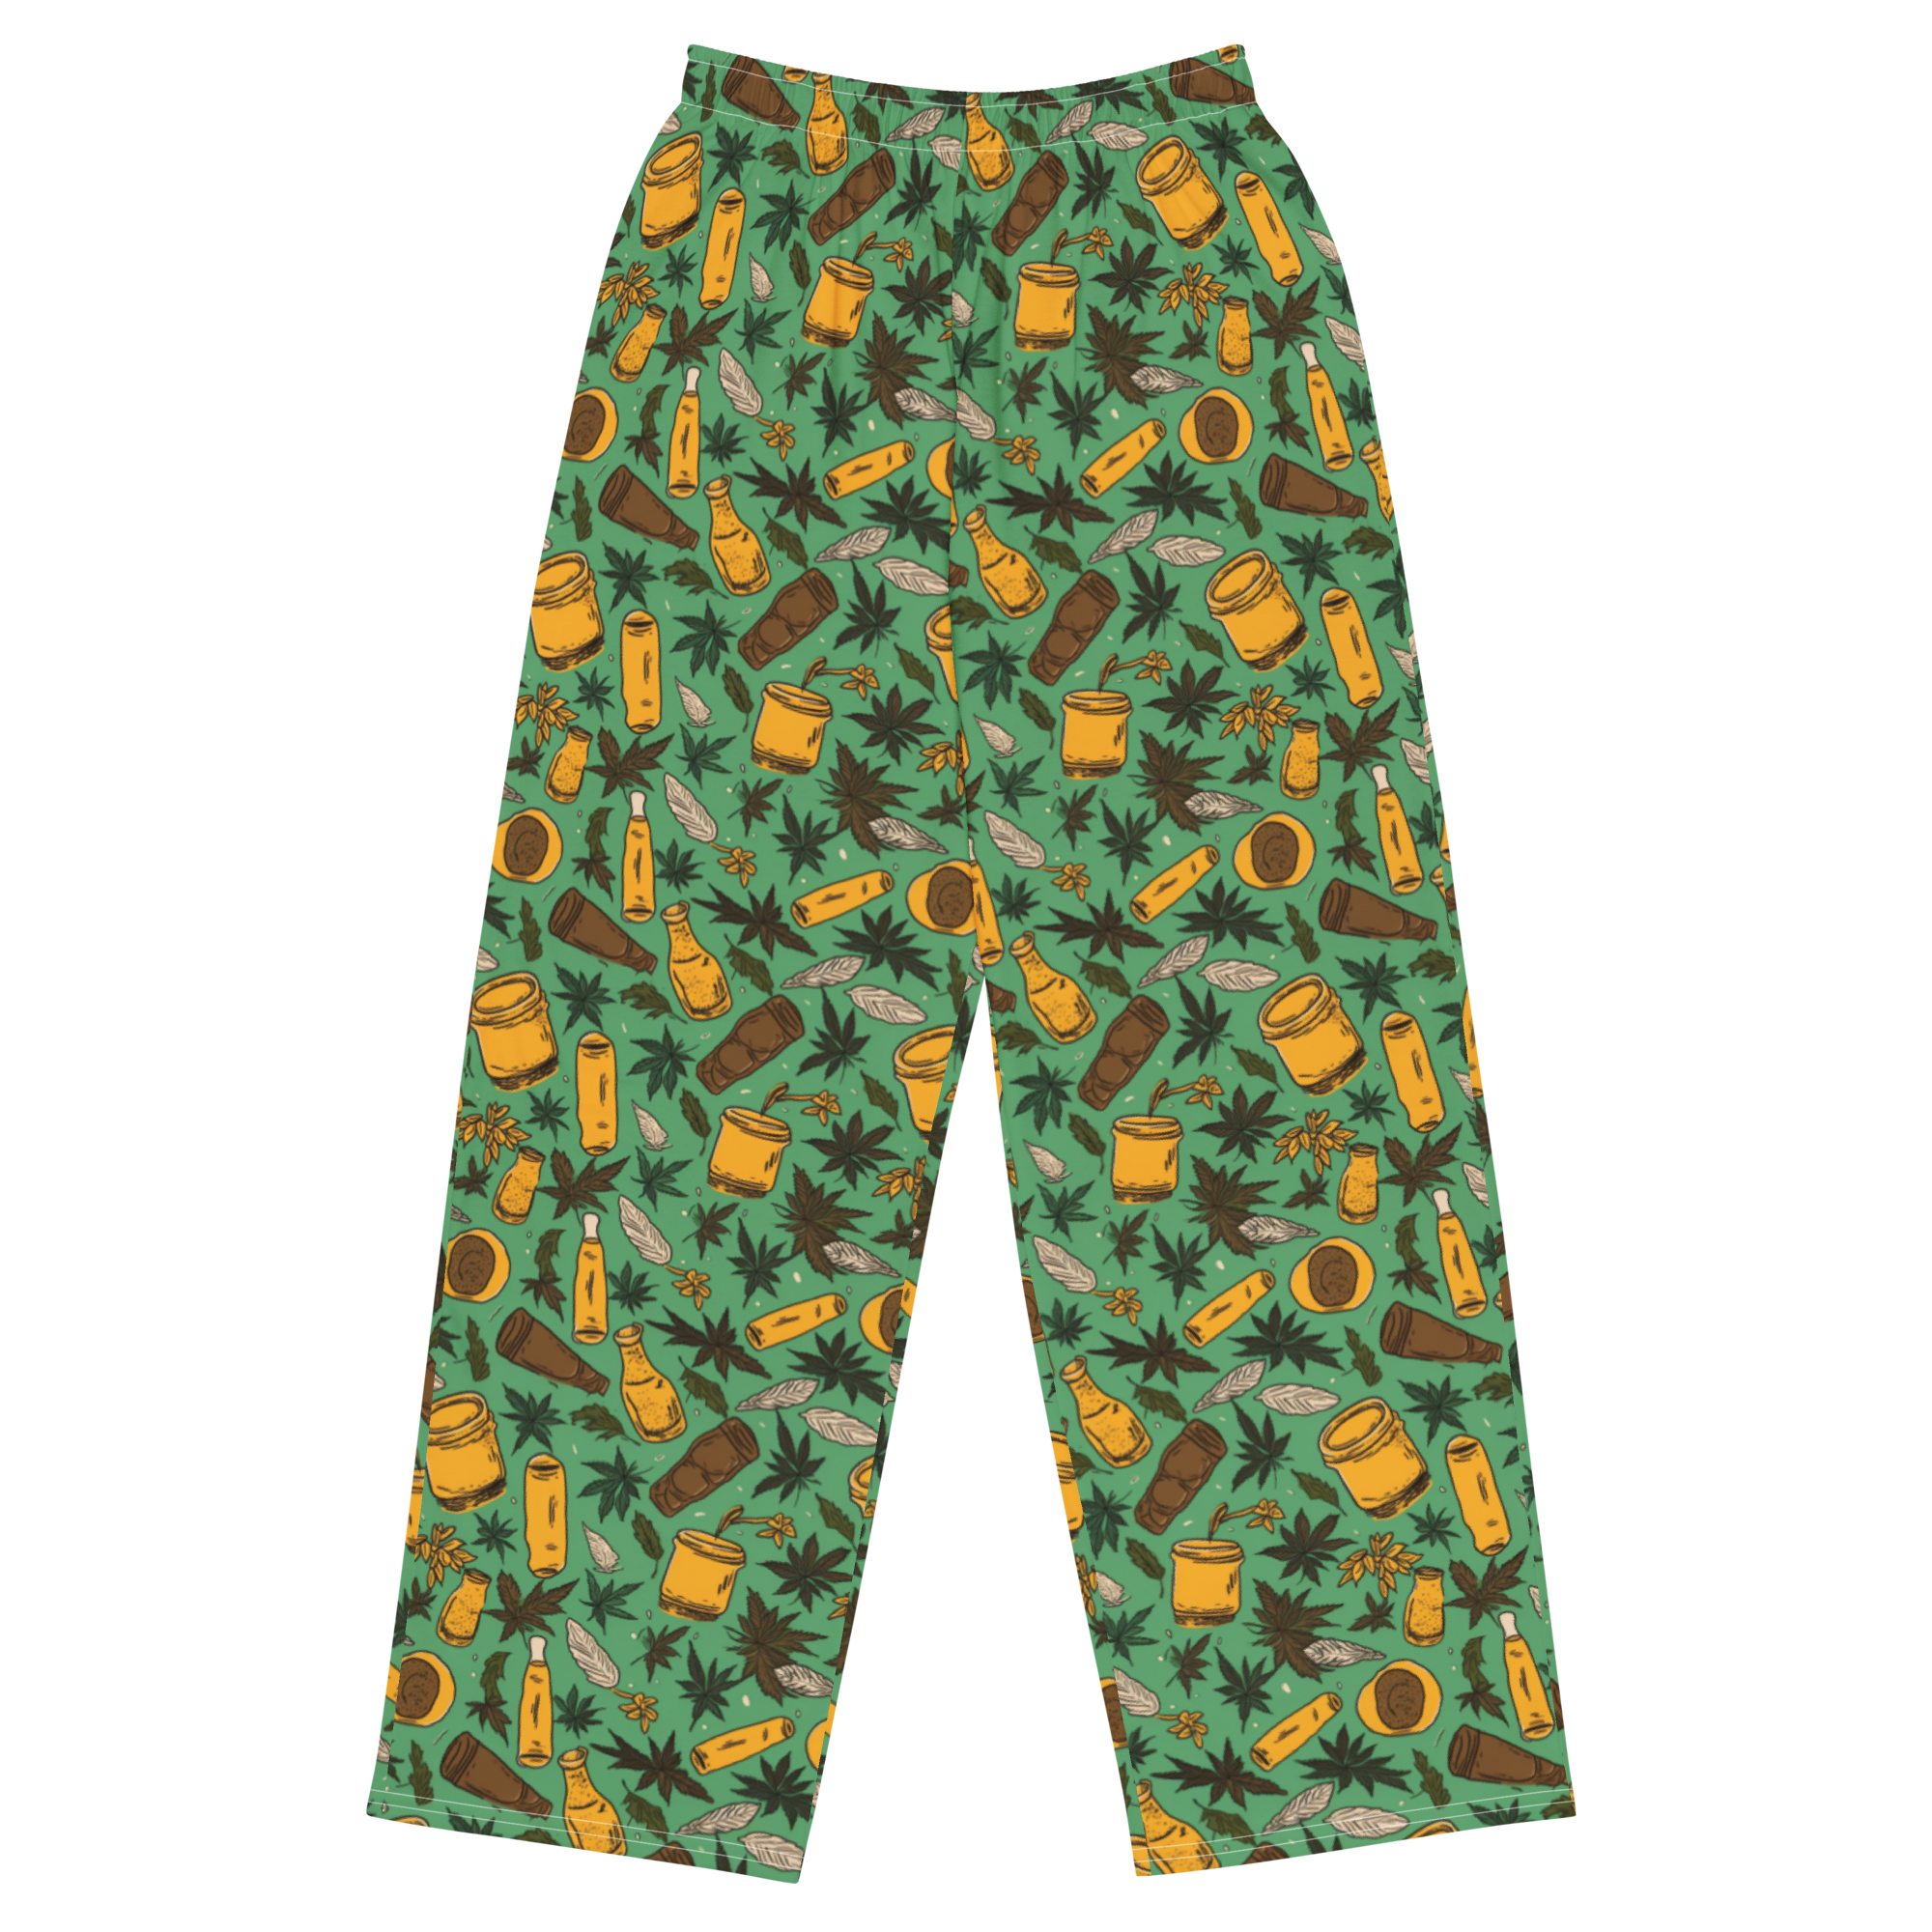 Camouflage Weed Leaf Pants: Cannabis-Inspired Fashion – Cannabis